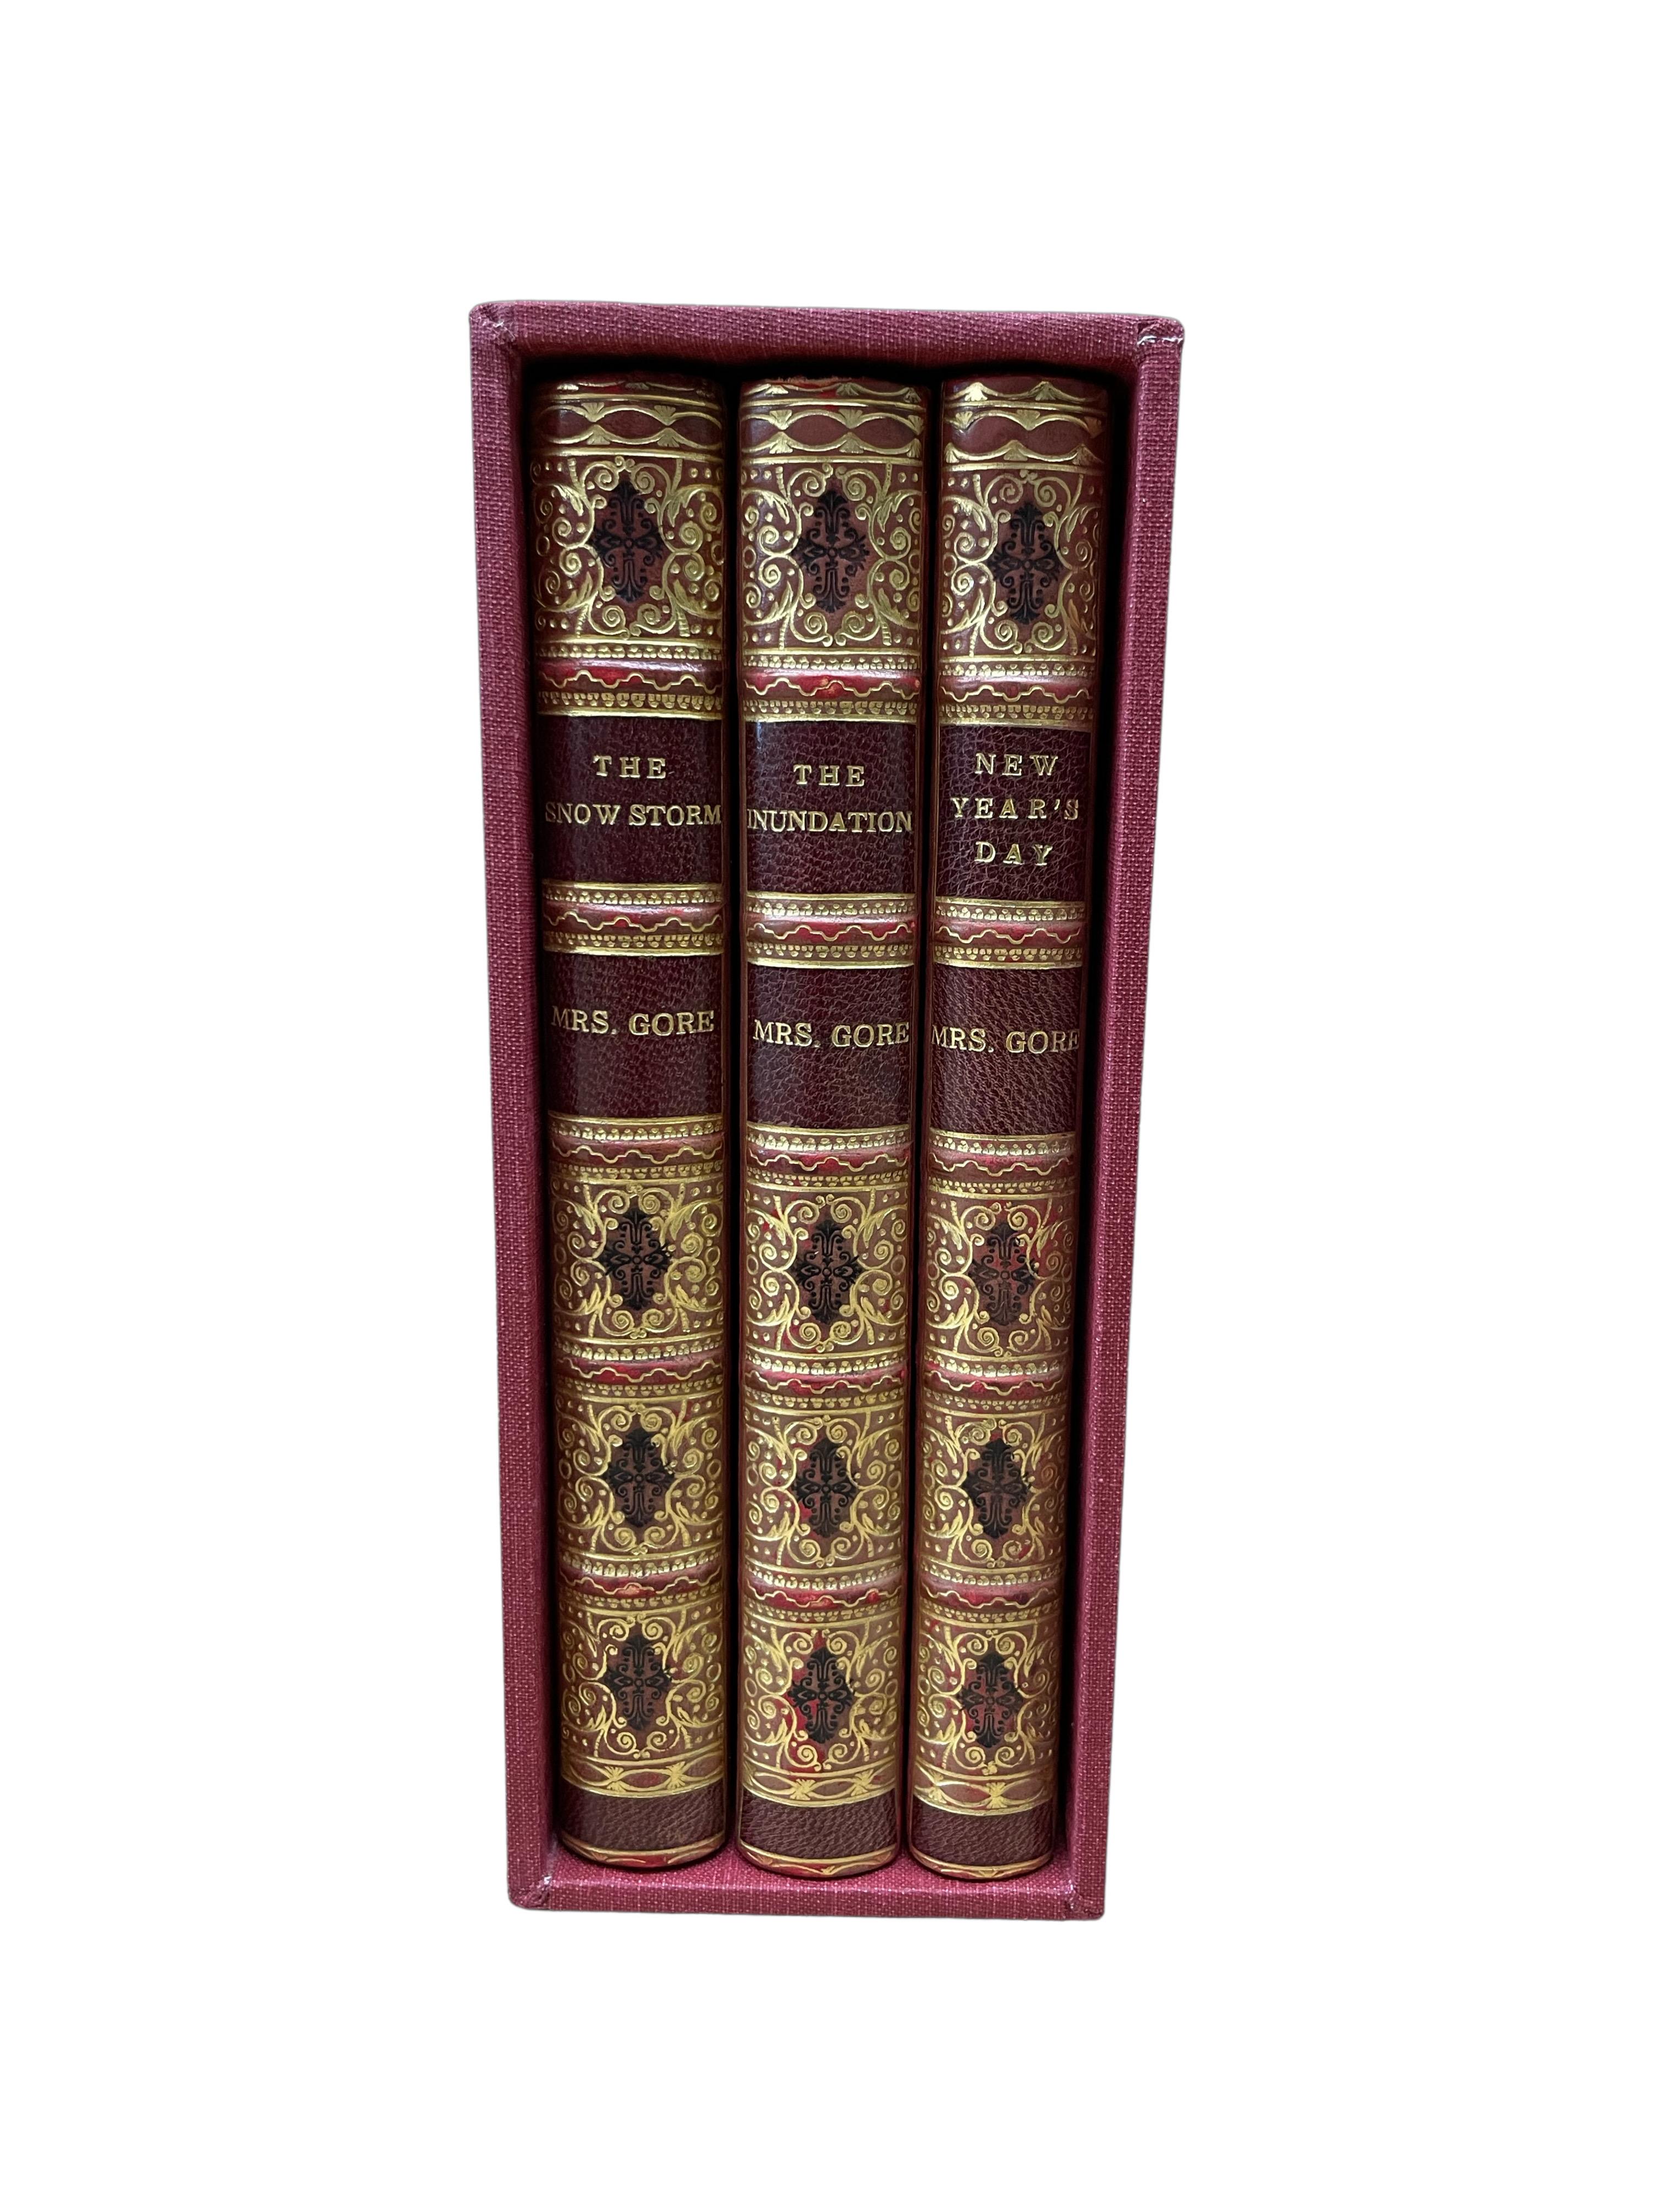 Gore, Catherine Grace Frances. The Snow Storm, A Christmas Story. [and] New Year's Day, A Winter Tale. [and] The Inundation; Or Pardon and Peace, A Christmas Story.  London: Fisher, Son & Co., [1847]. Three volumes, 12mo. All volumes illustrated by